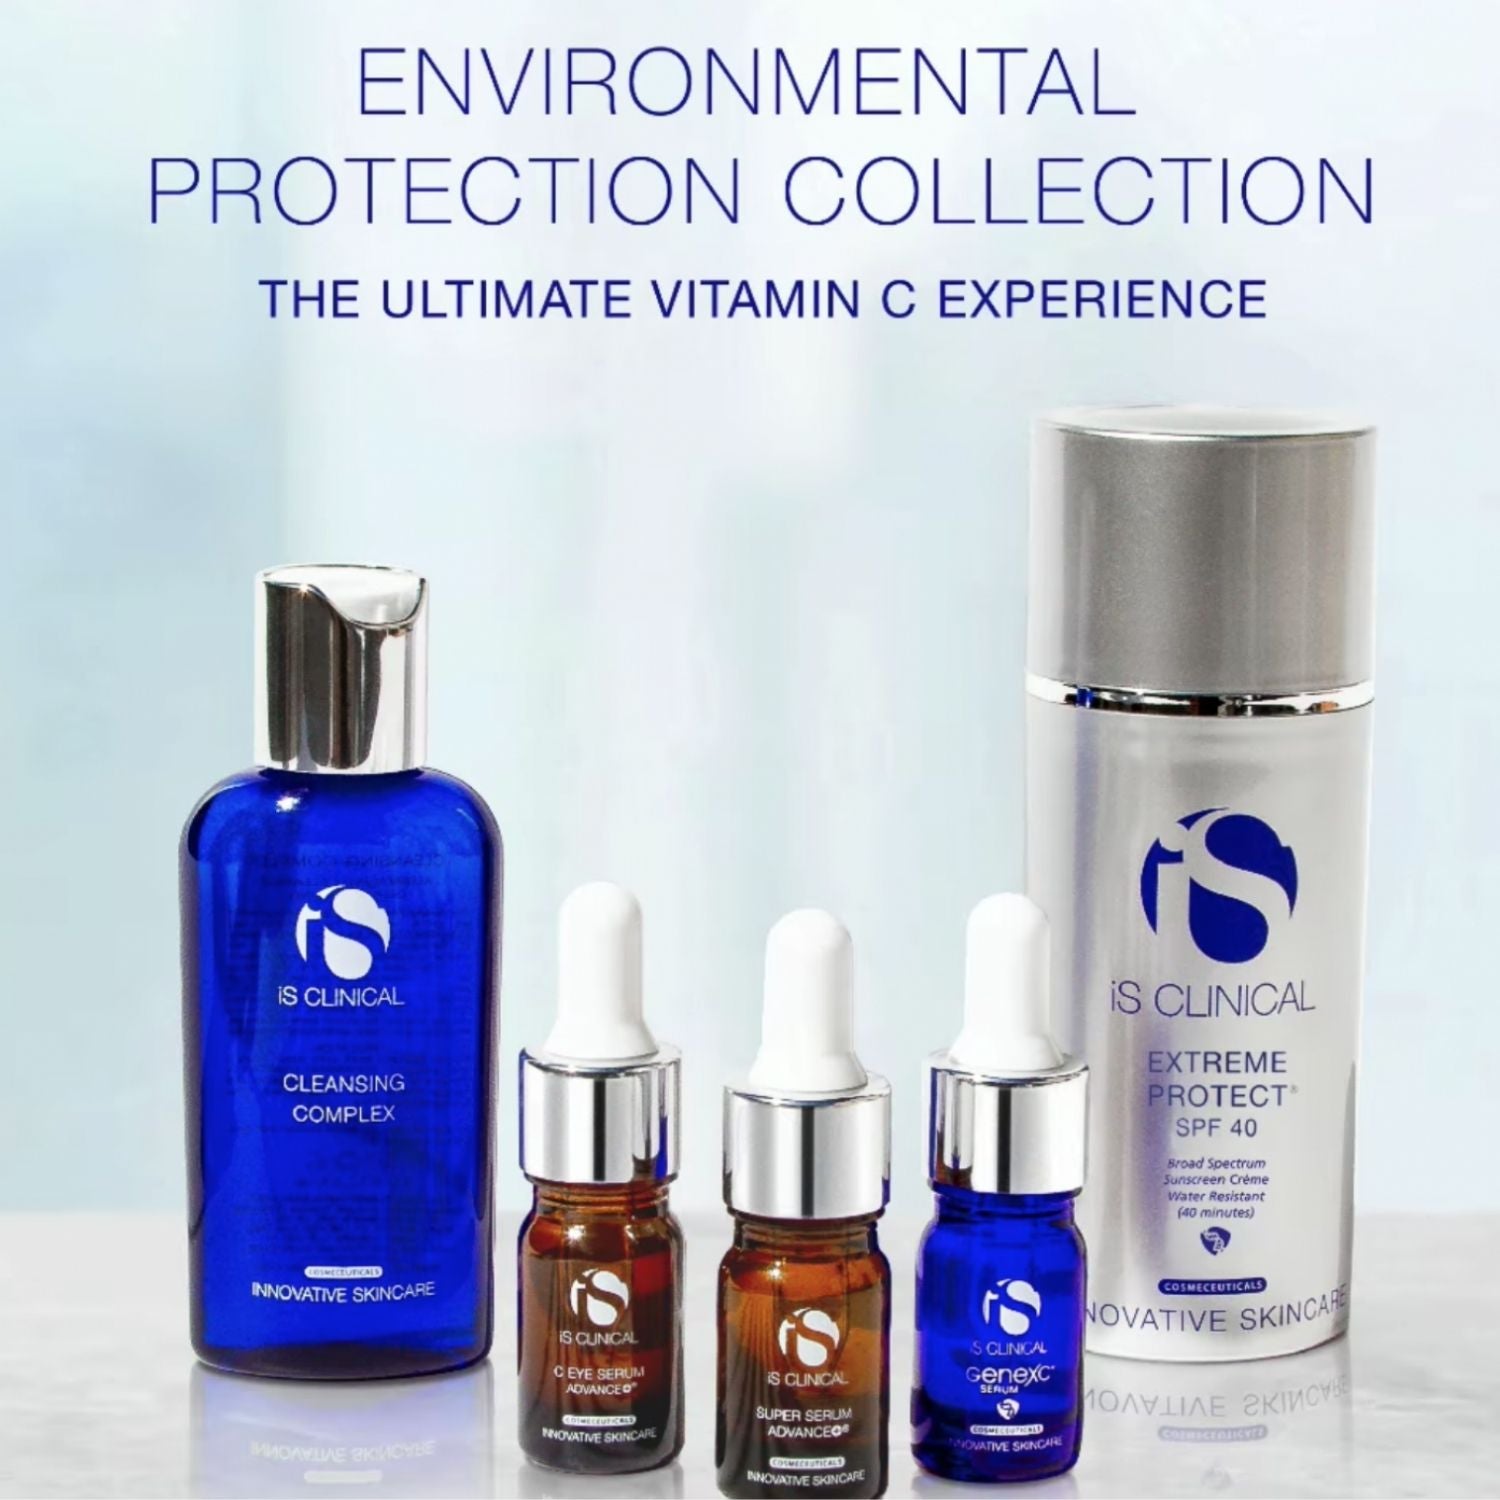 Is Clinical Environmental Protection Collection - Dr. Pen Store - iS Clinical Buy Genuine Dr Pen Products with Trust